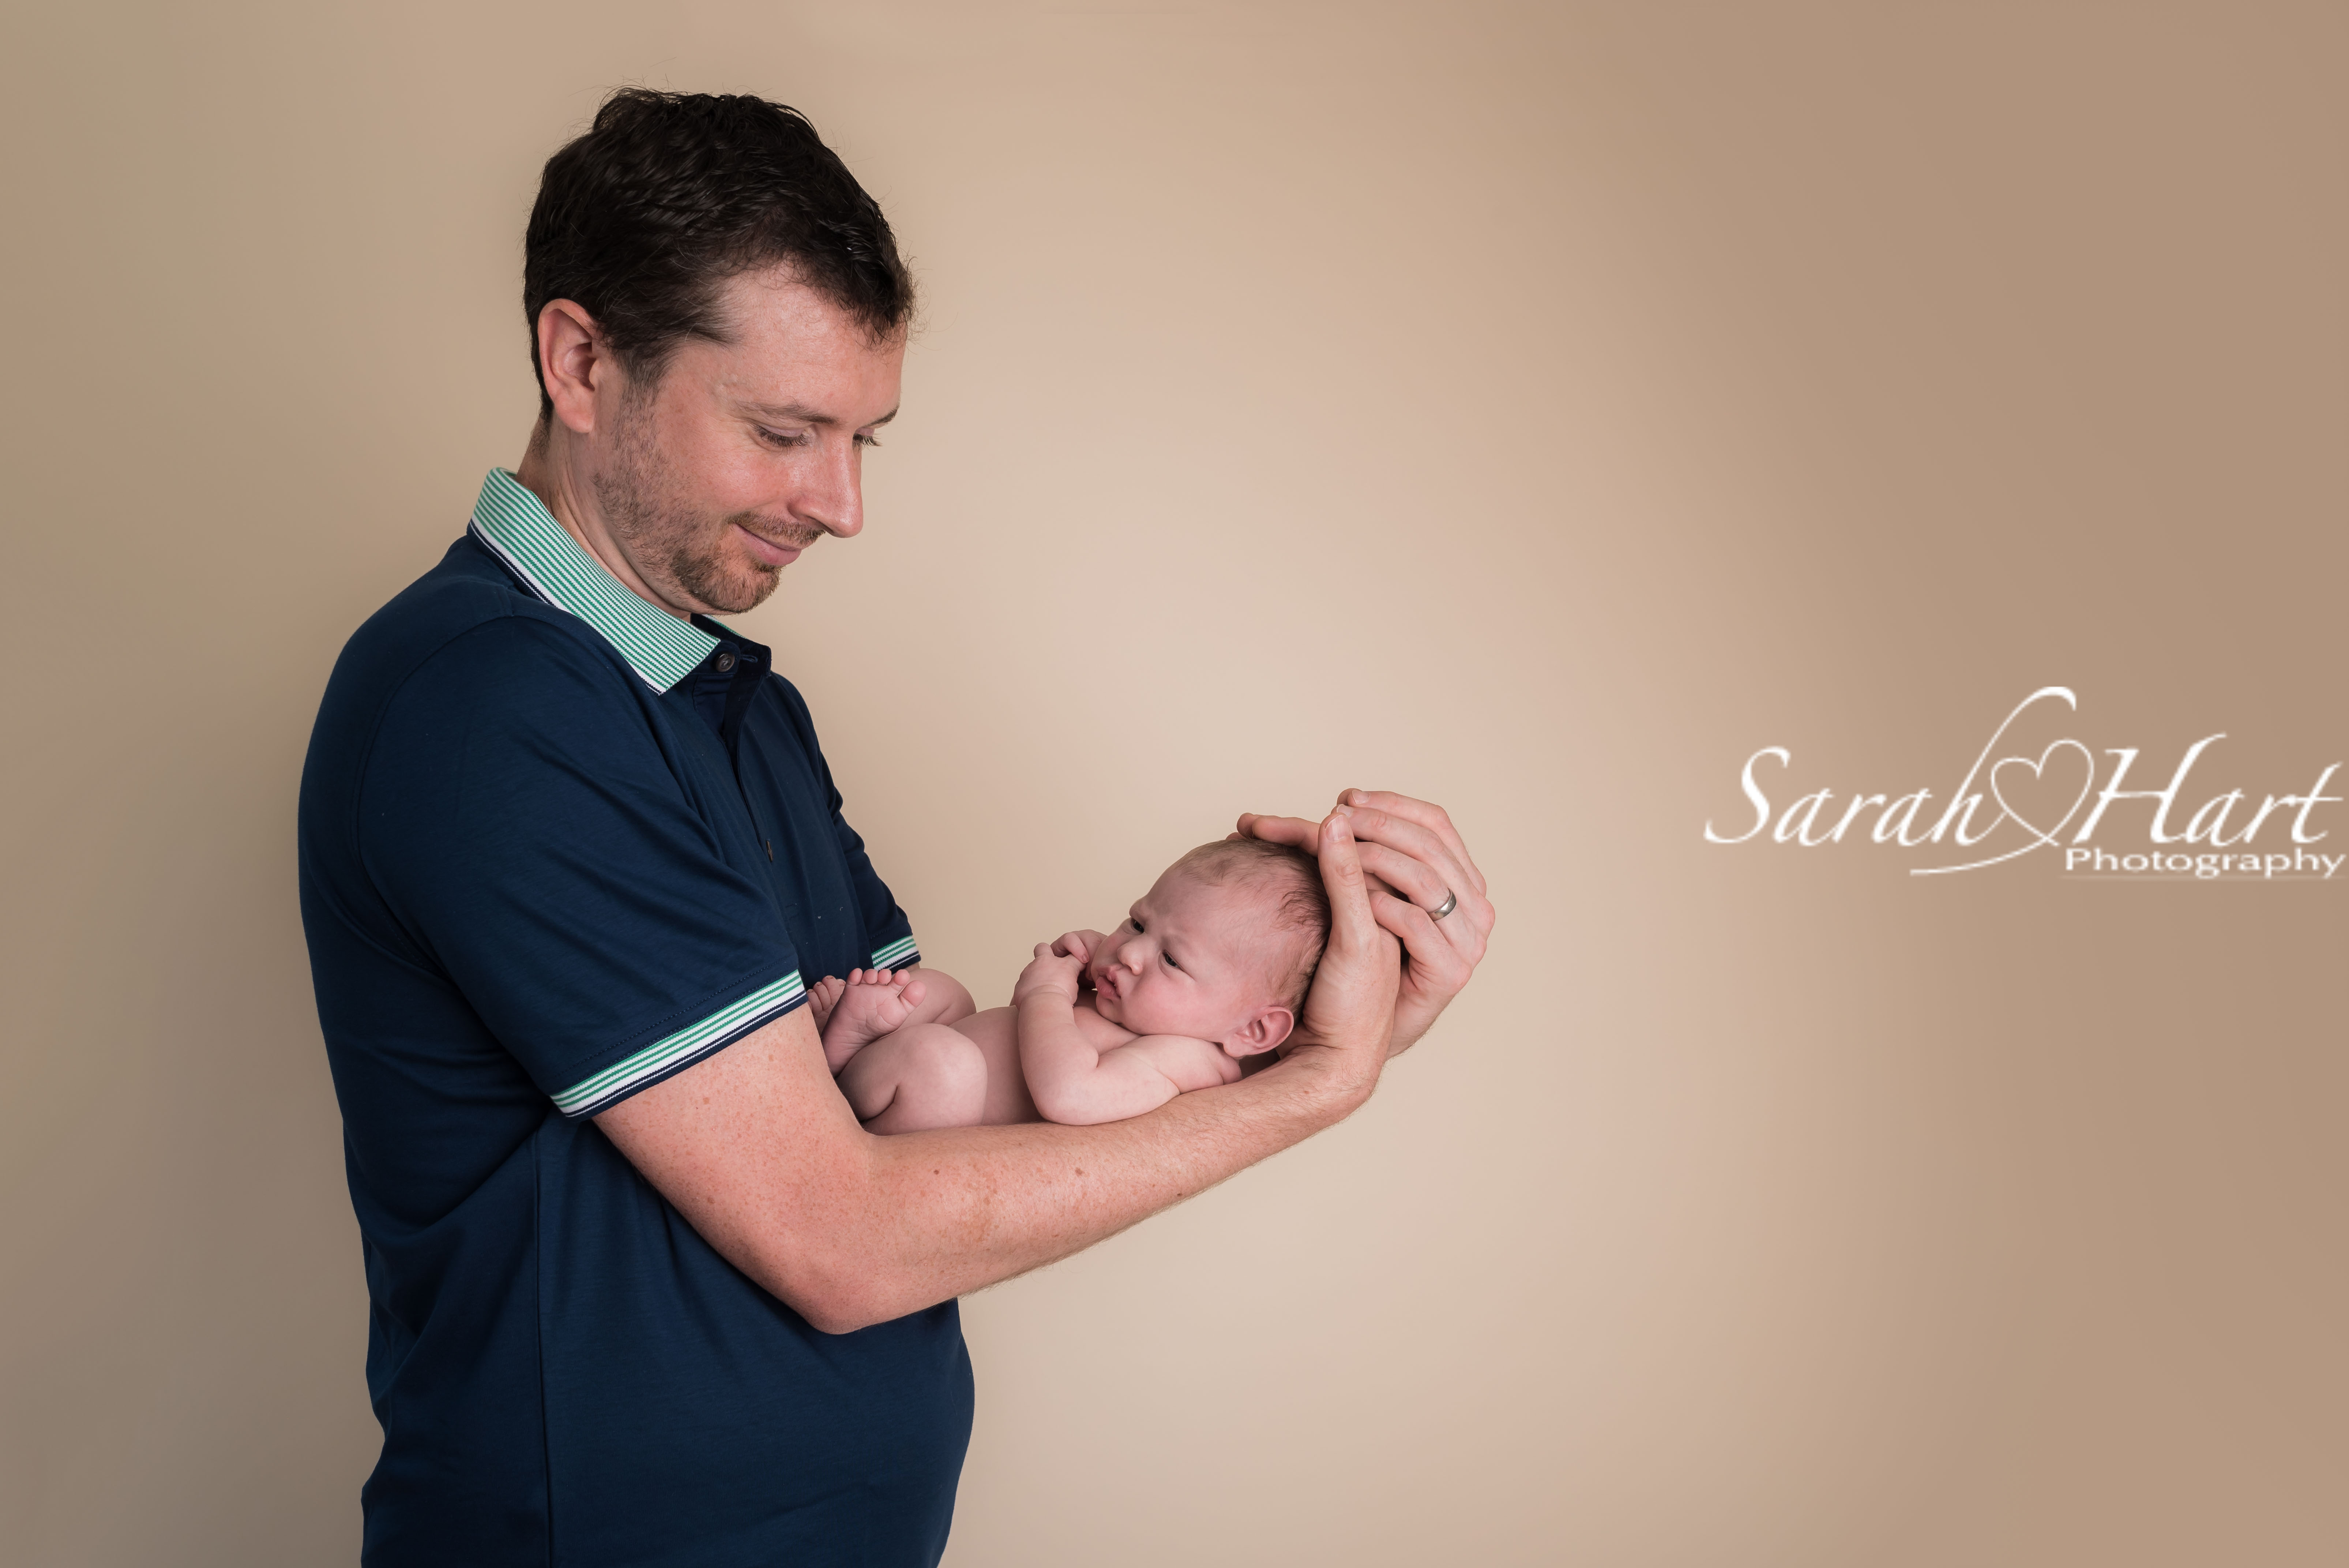 In daddy's arms, newborn photography with Sarah Hart, Tonbridge, Kent & East Sussex